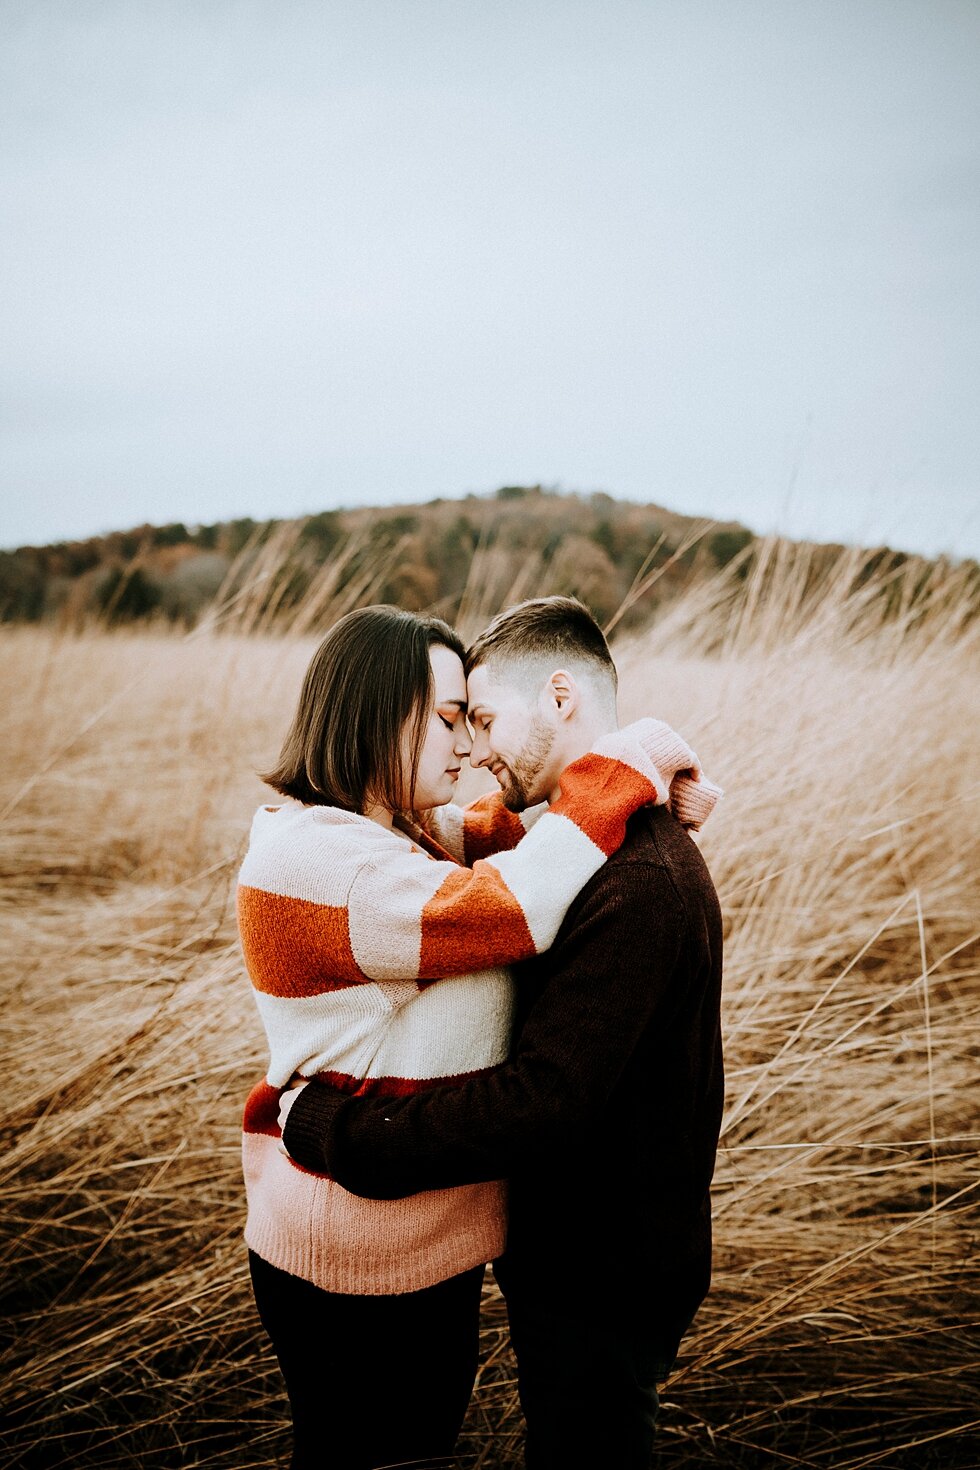  Forehead to forehead this engaged couple poses just before they share a kiss. #engagementgoals #engagementphotographer #engaged #outdoorengagement #kentuckyphotographer #indianaphotographer #louisvillephotographer #engagementphotos #savethedatephoto